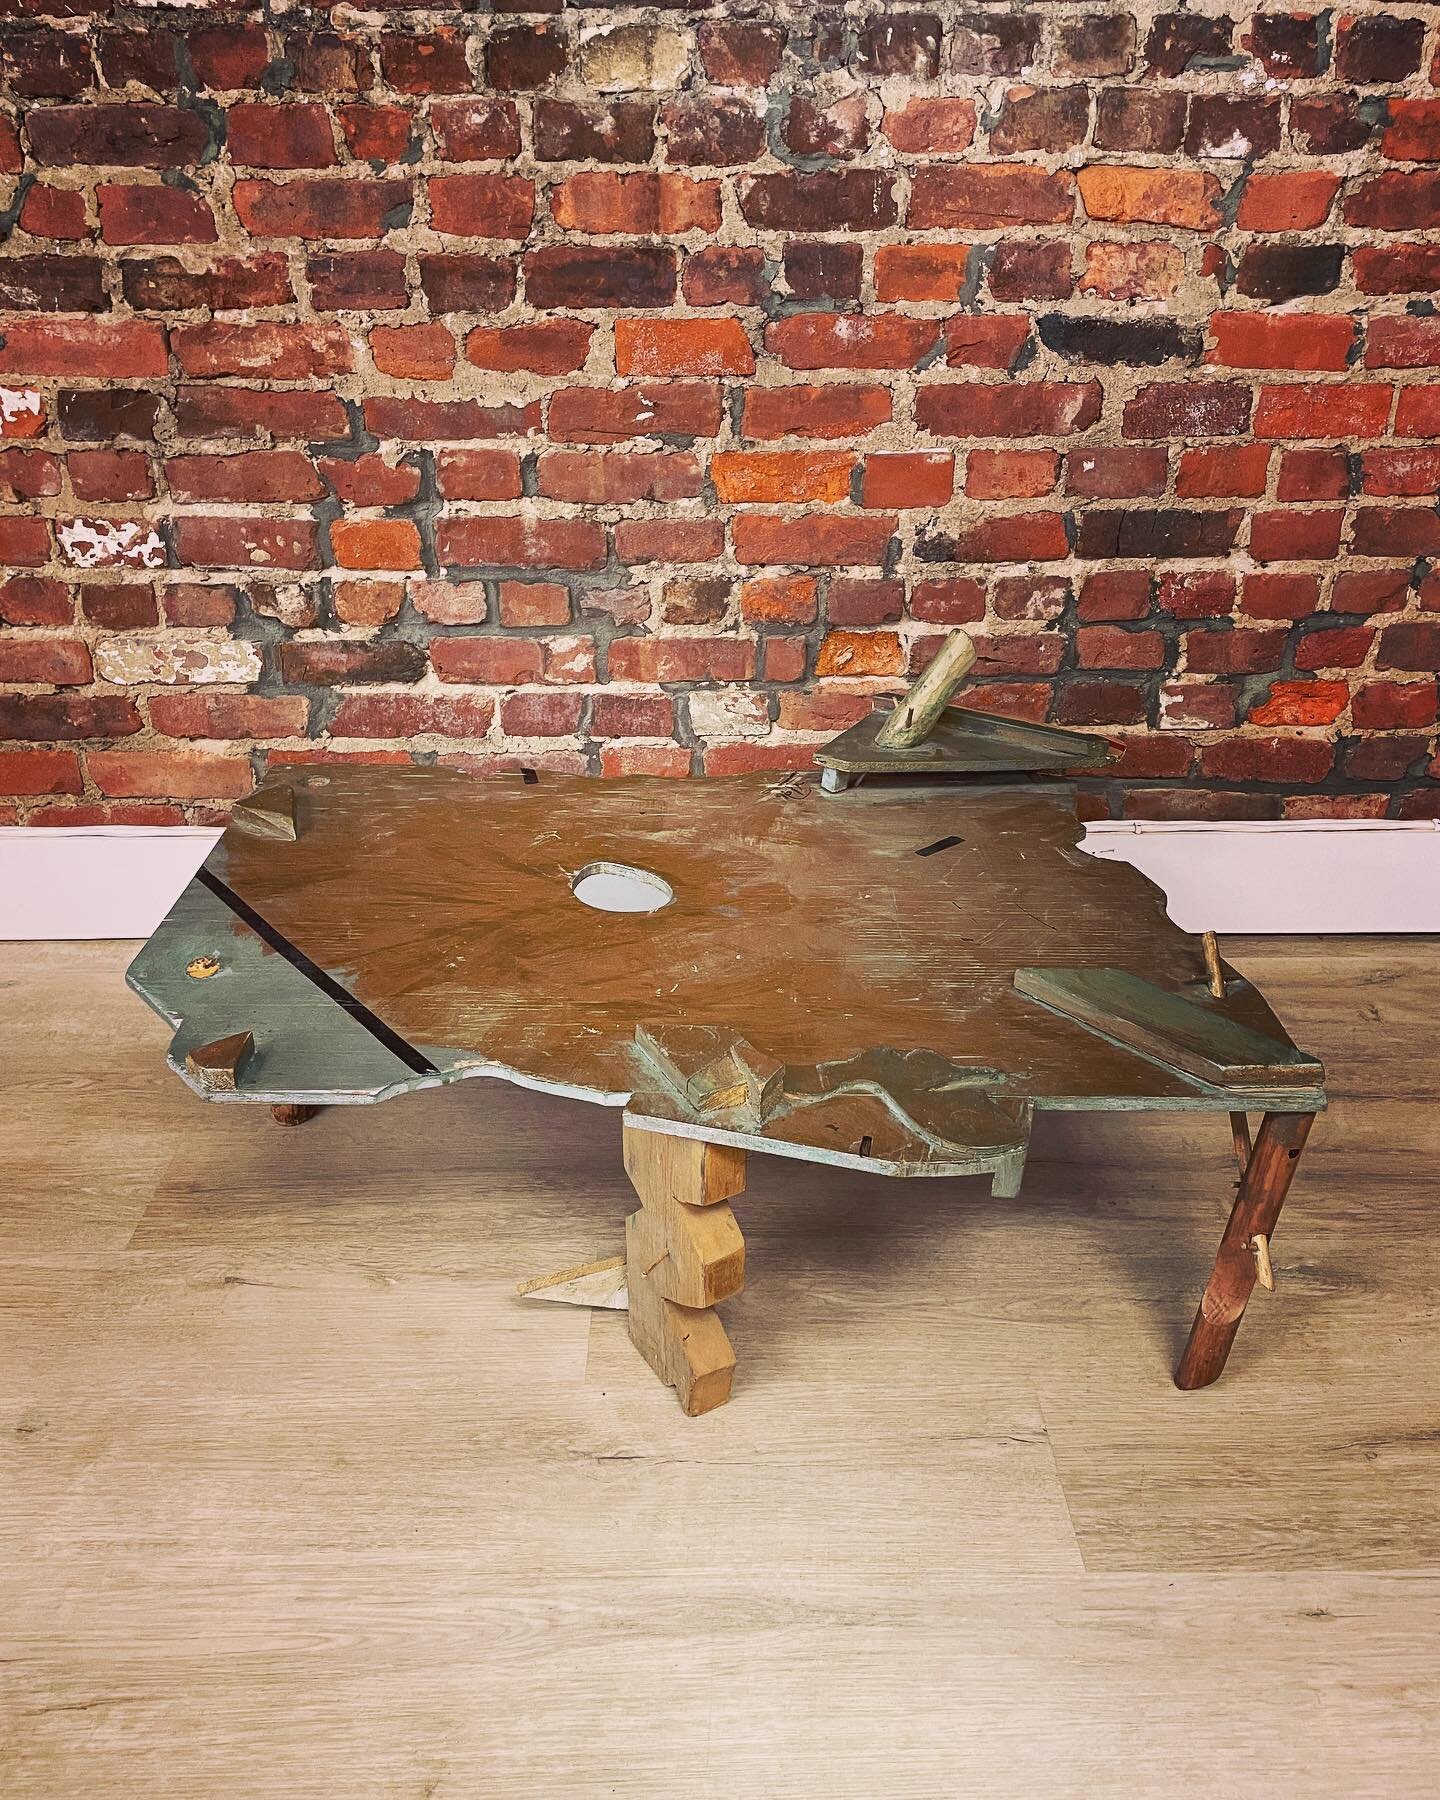 💥For Sale!💥 TABLE 2!  ART ART ART ART ART ART ART.  I love art.  I love sculpture. I love weird shapes and colors whose only reason to be is to look cool. So here&rsquo;s this!  Sculptural art table attributed to NY artist and teacher Robert Hardin